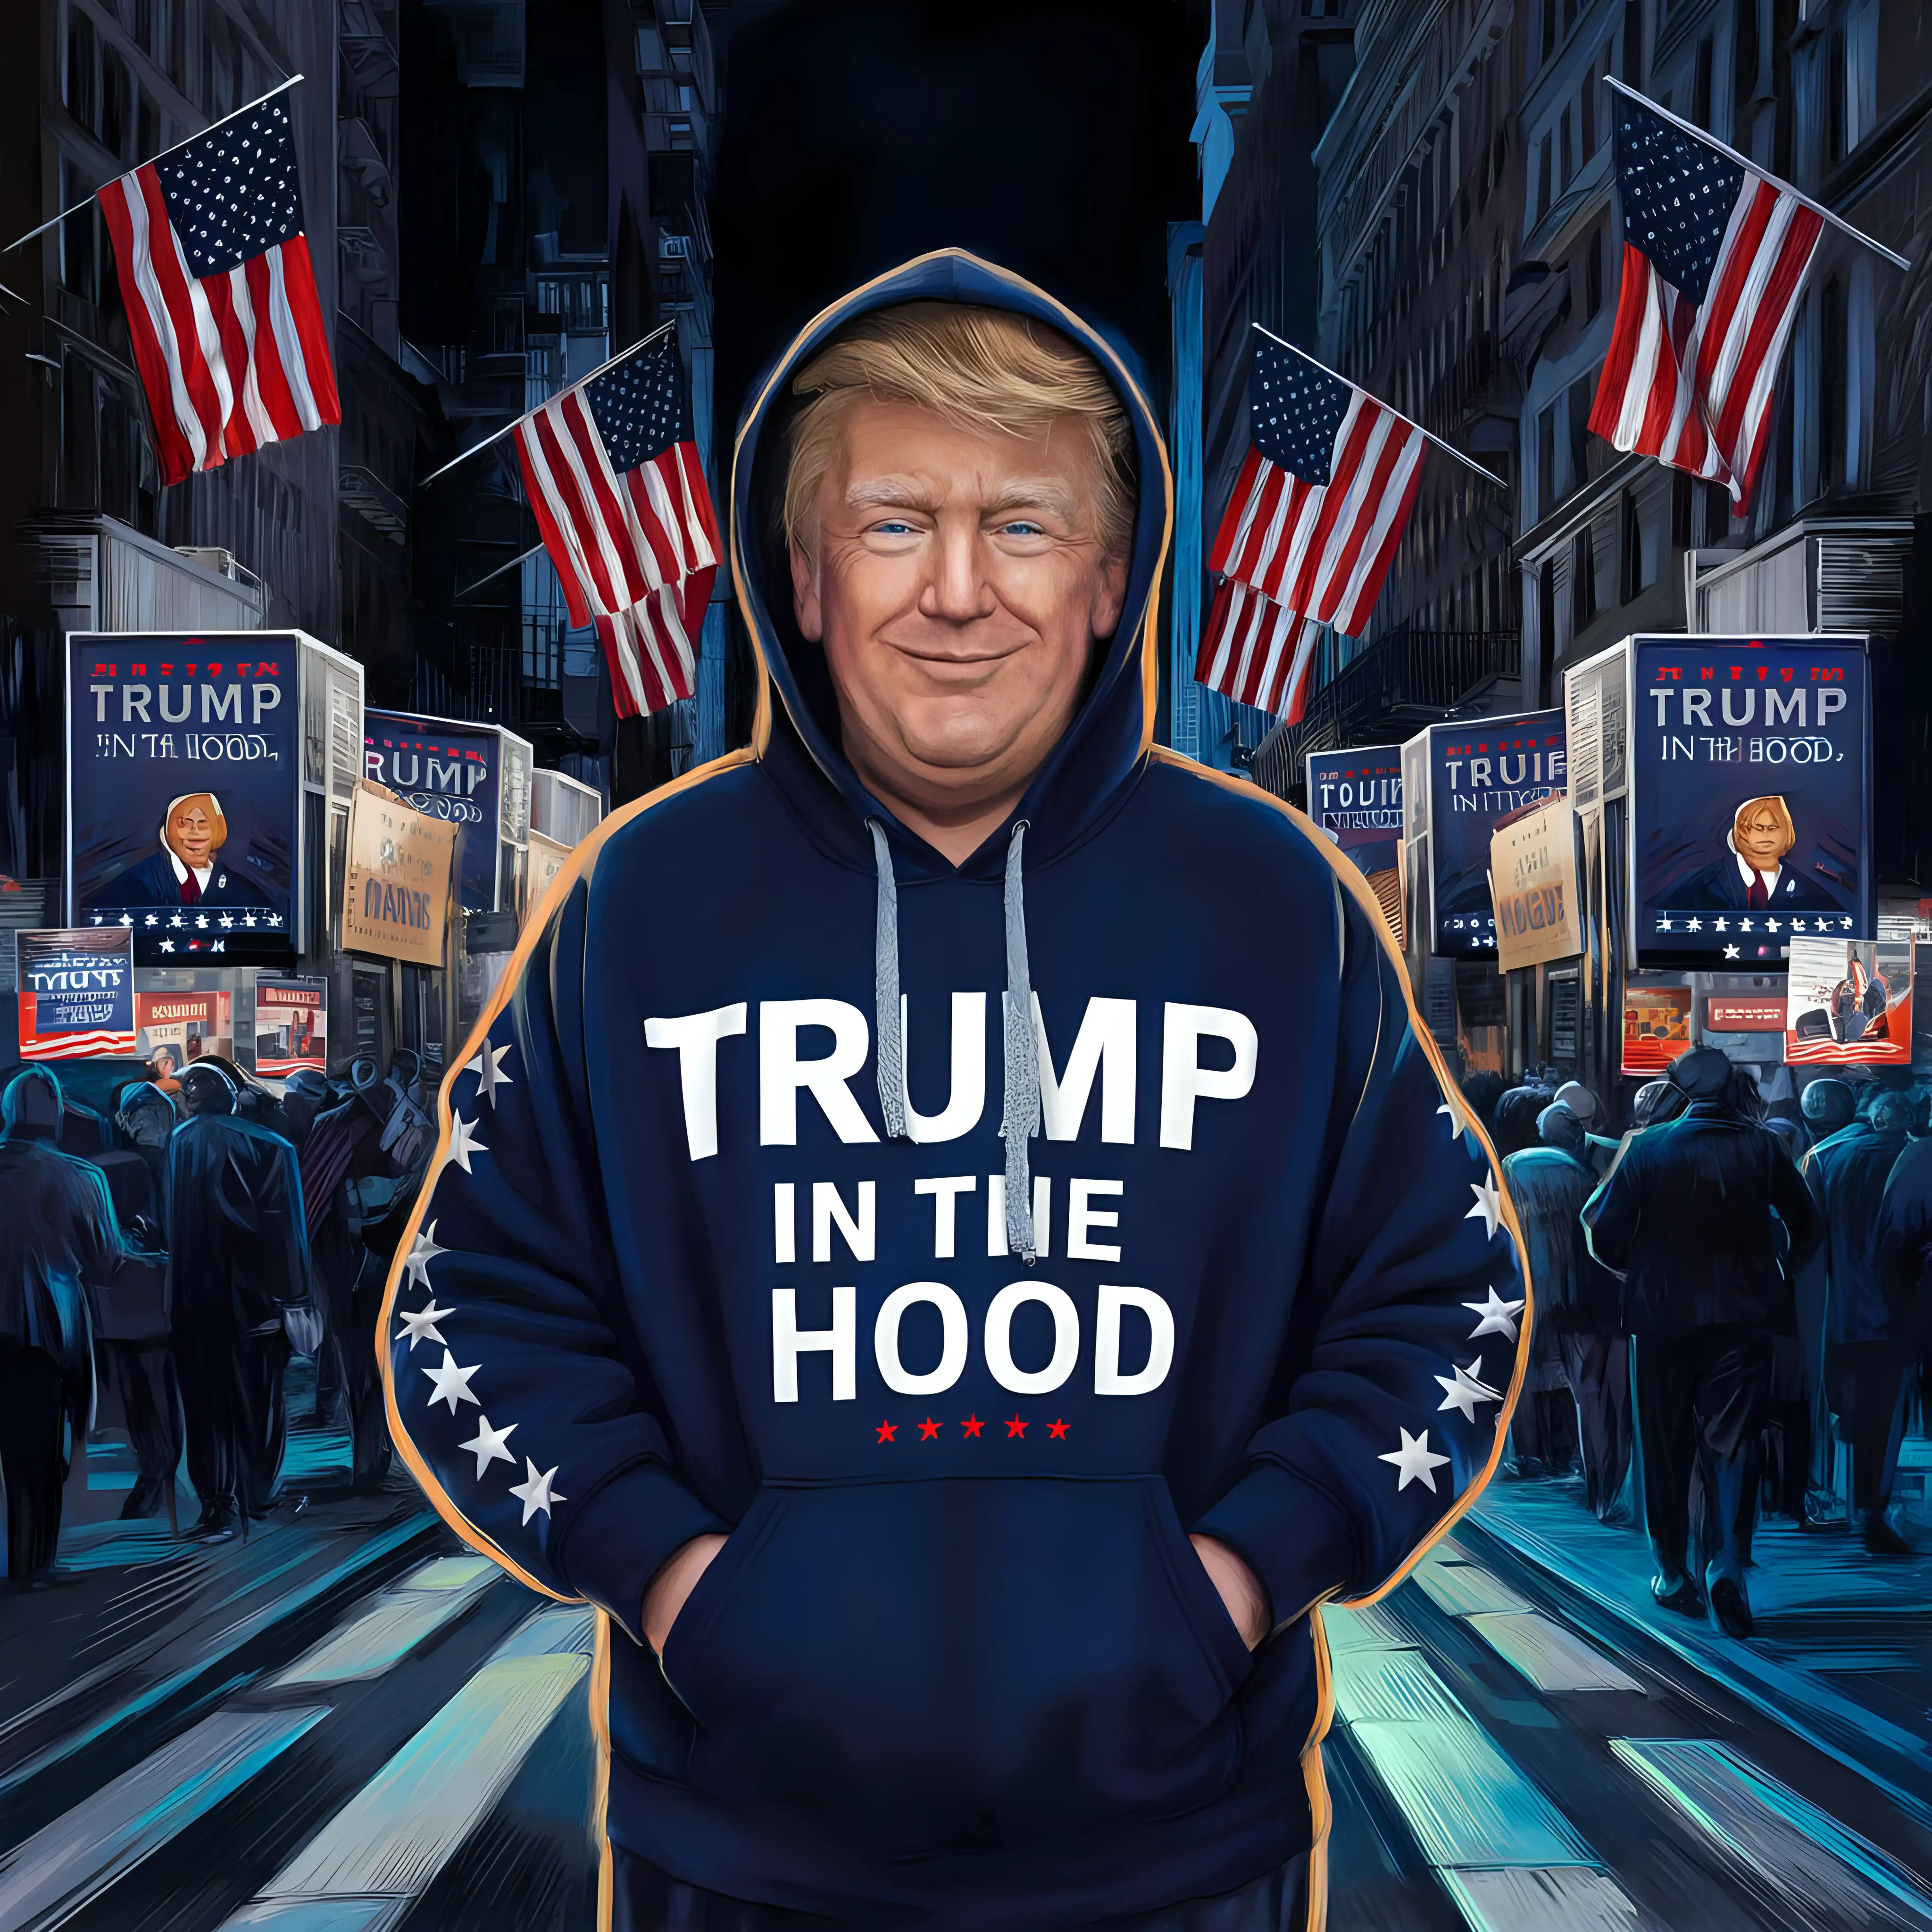 Patriotic Election Illustration Featuring Trump in the Hood